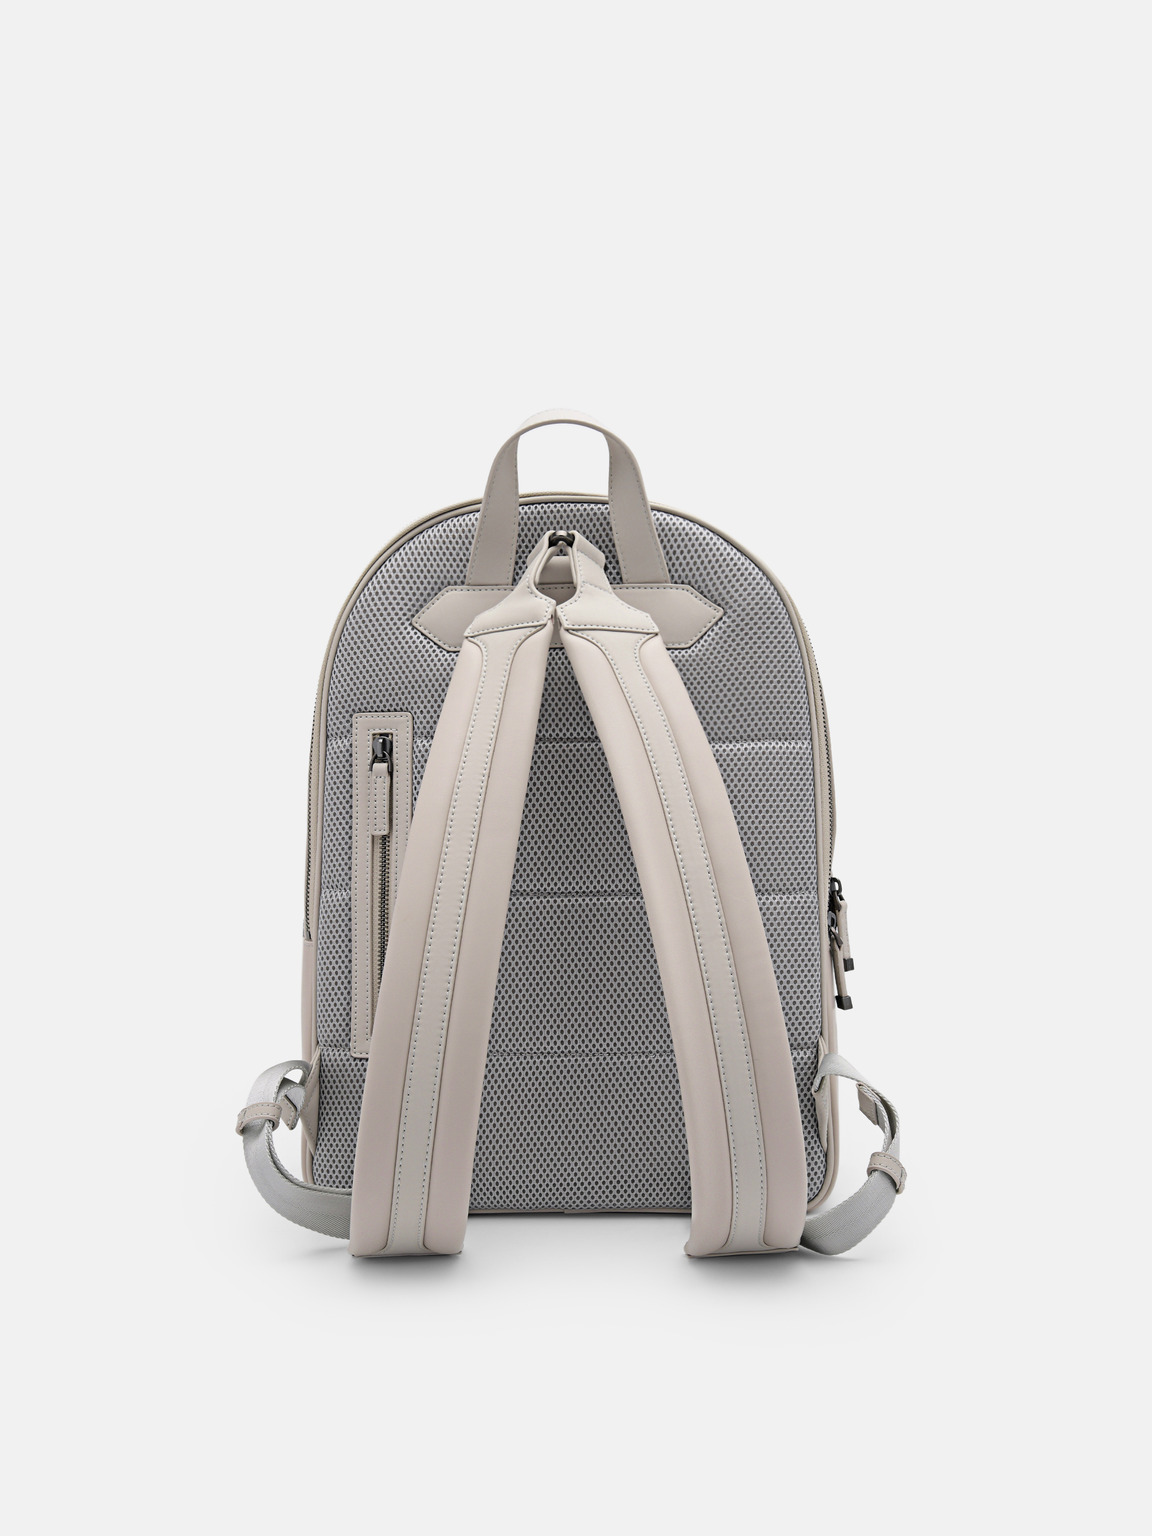 PEDRO Icon Backpack in Pixel, Taupe